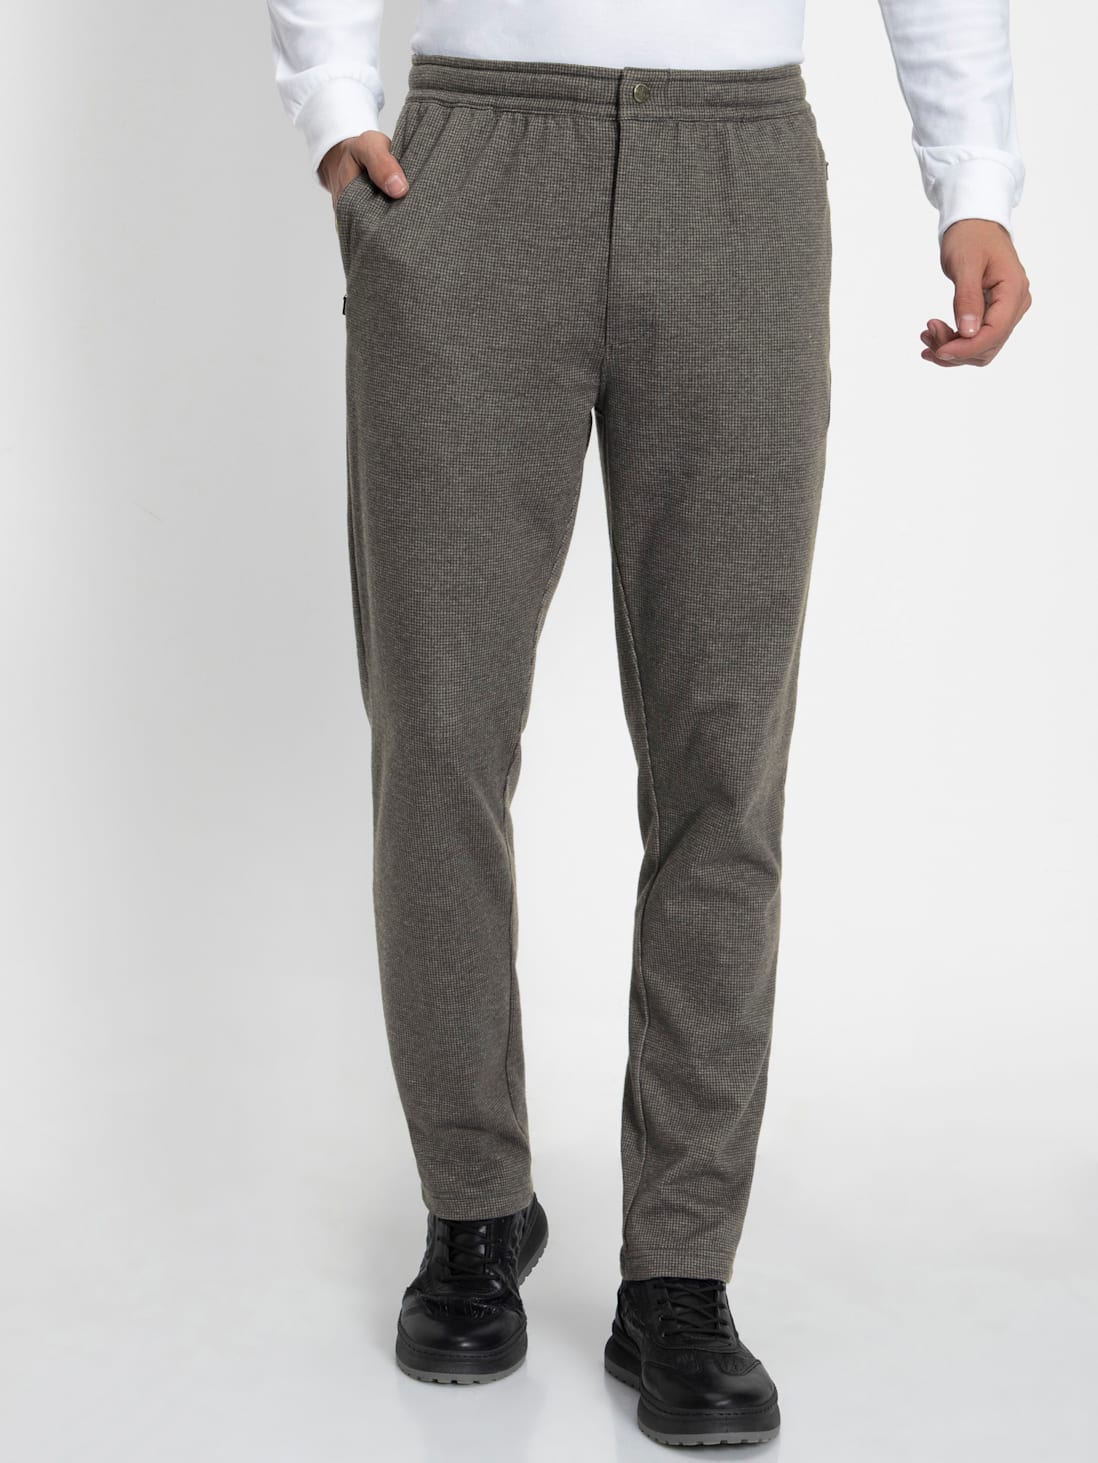 Buy Invictus Trousers online  Men  260 products  FASHIOLAin